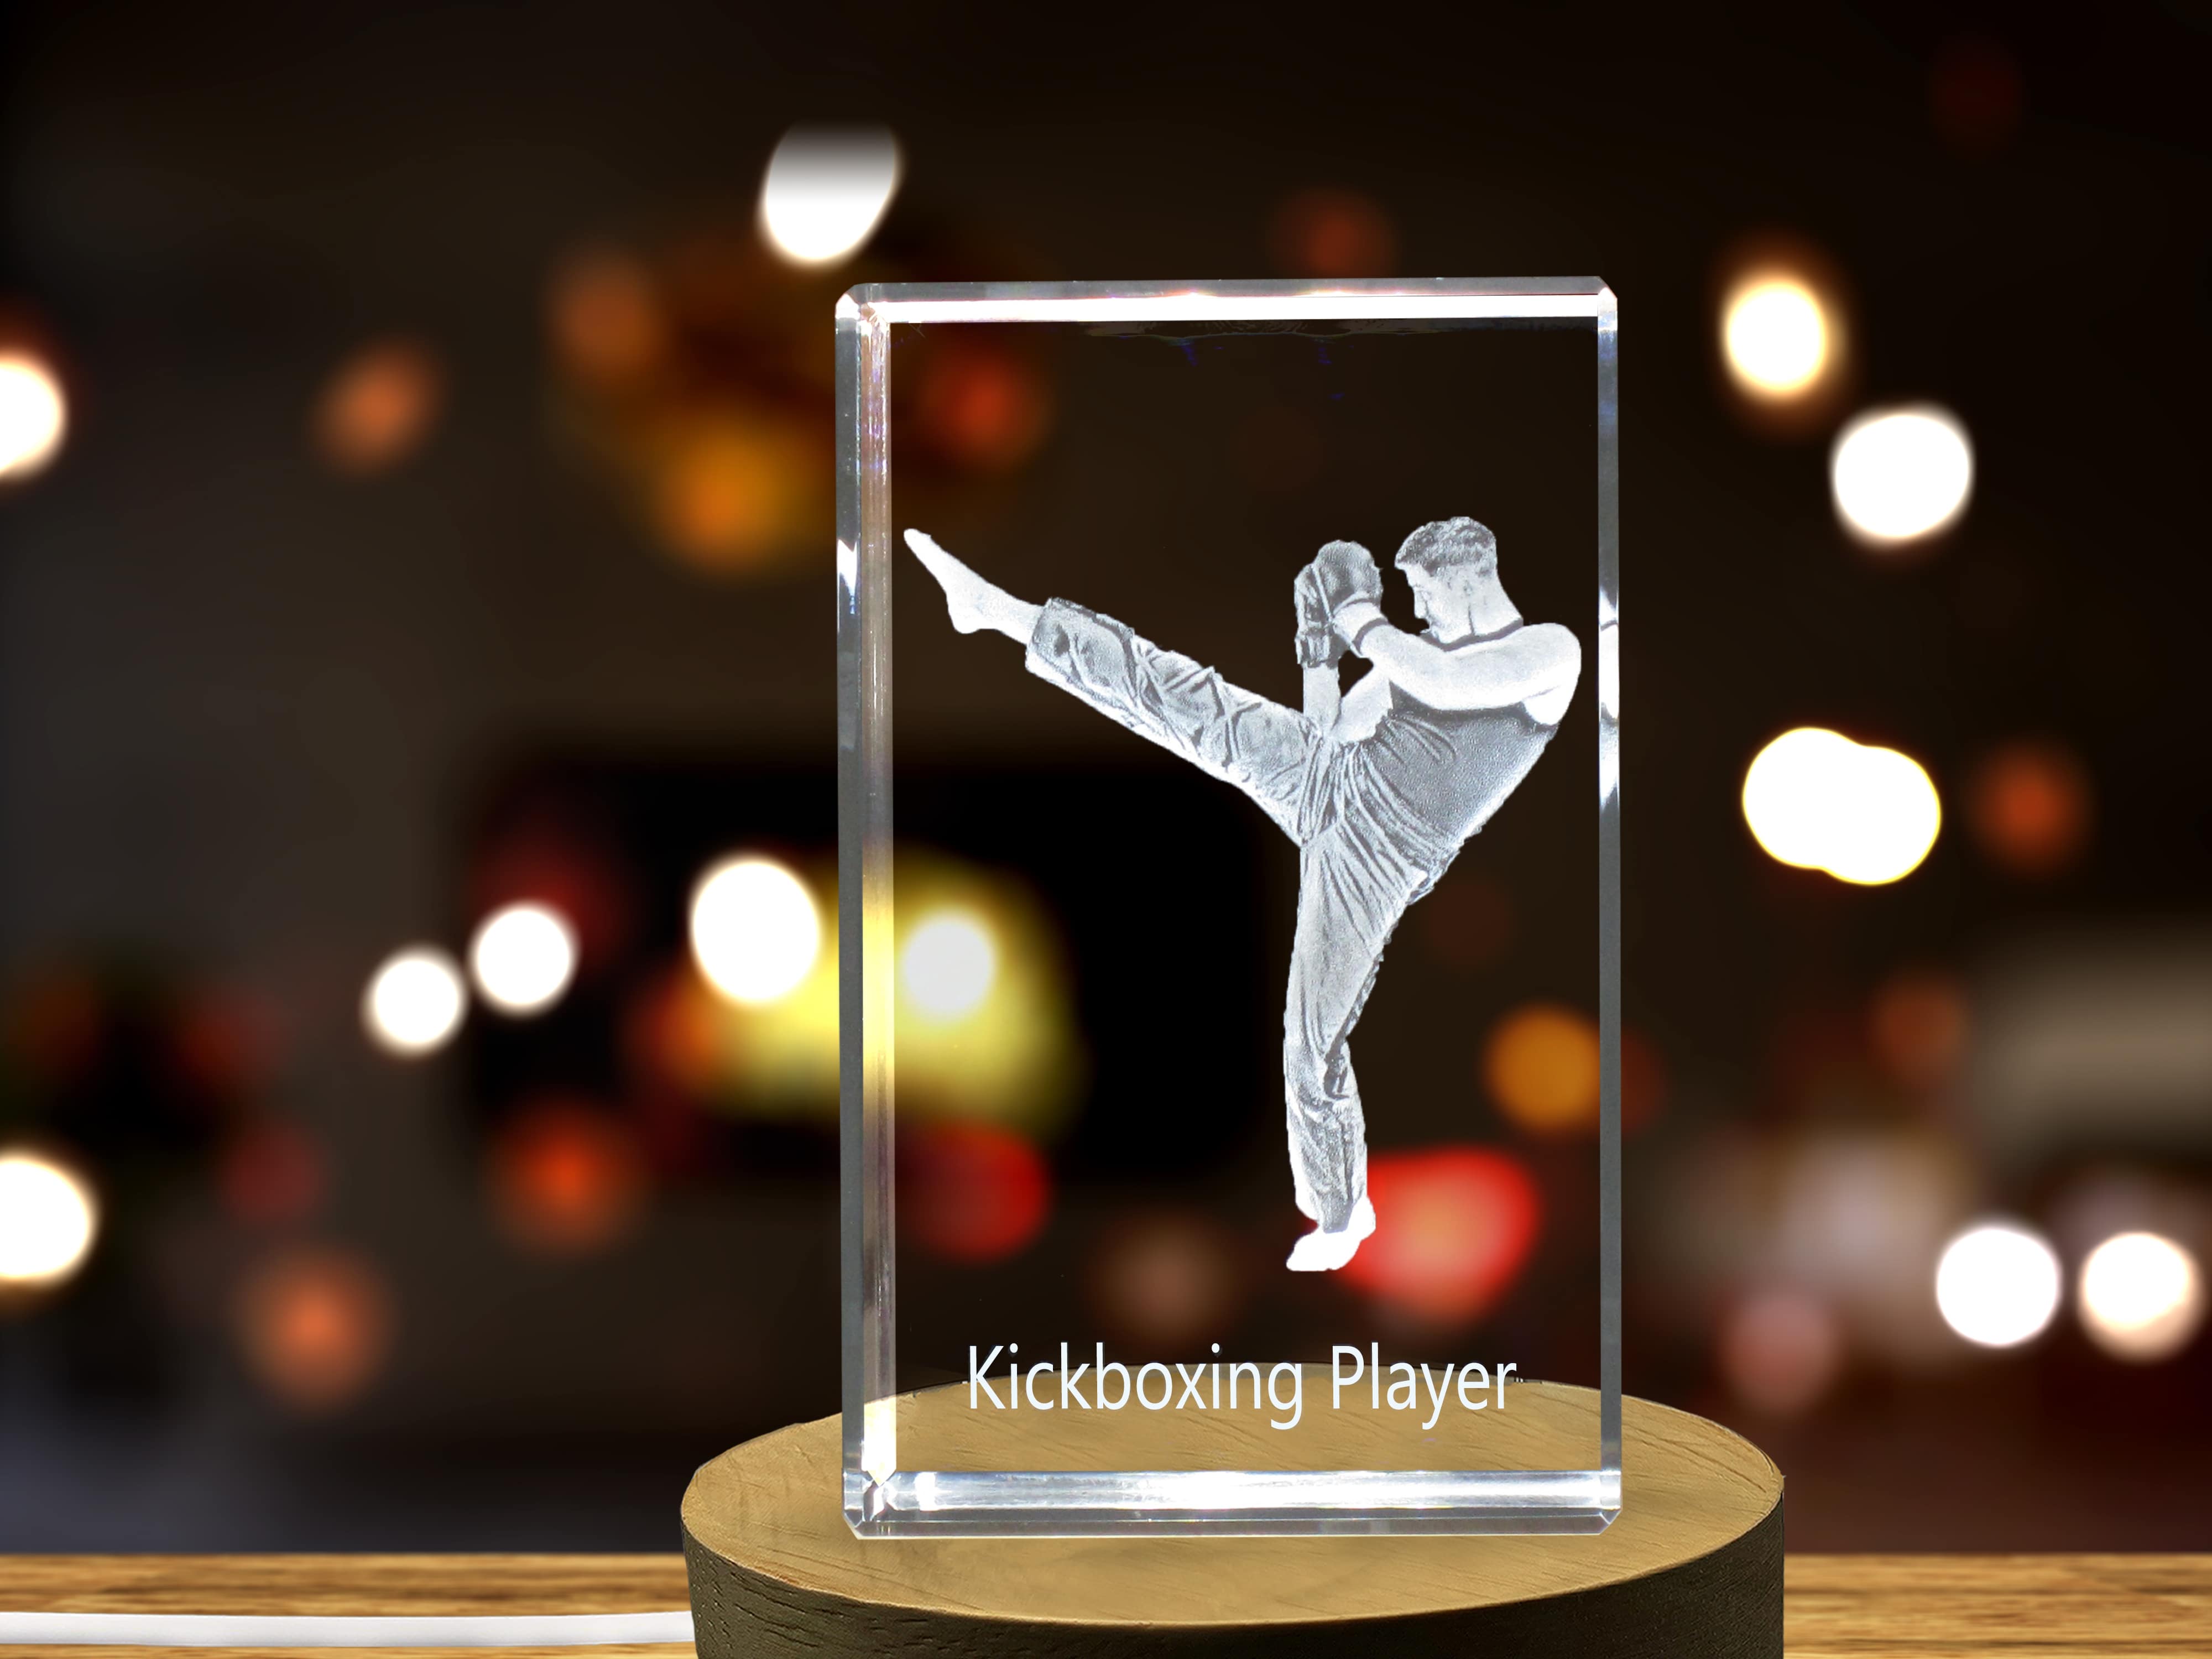 Kickboxing Player 3D Engraved Crystal 3D Engraved Crystal Keepsake/Gift/Decor/Collectible/Souvenir A&B Crystal Collection